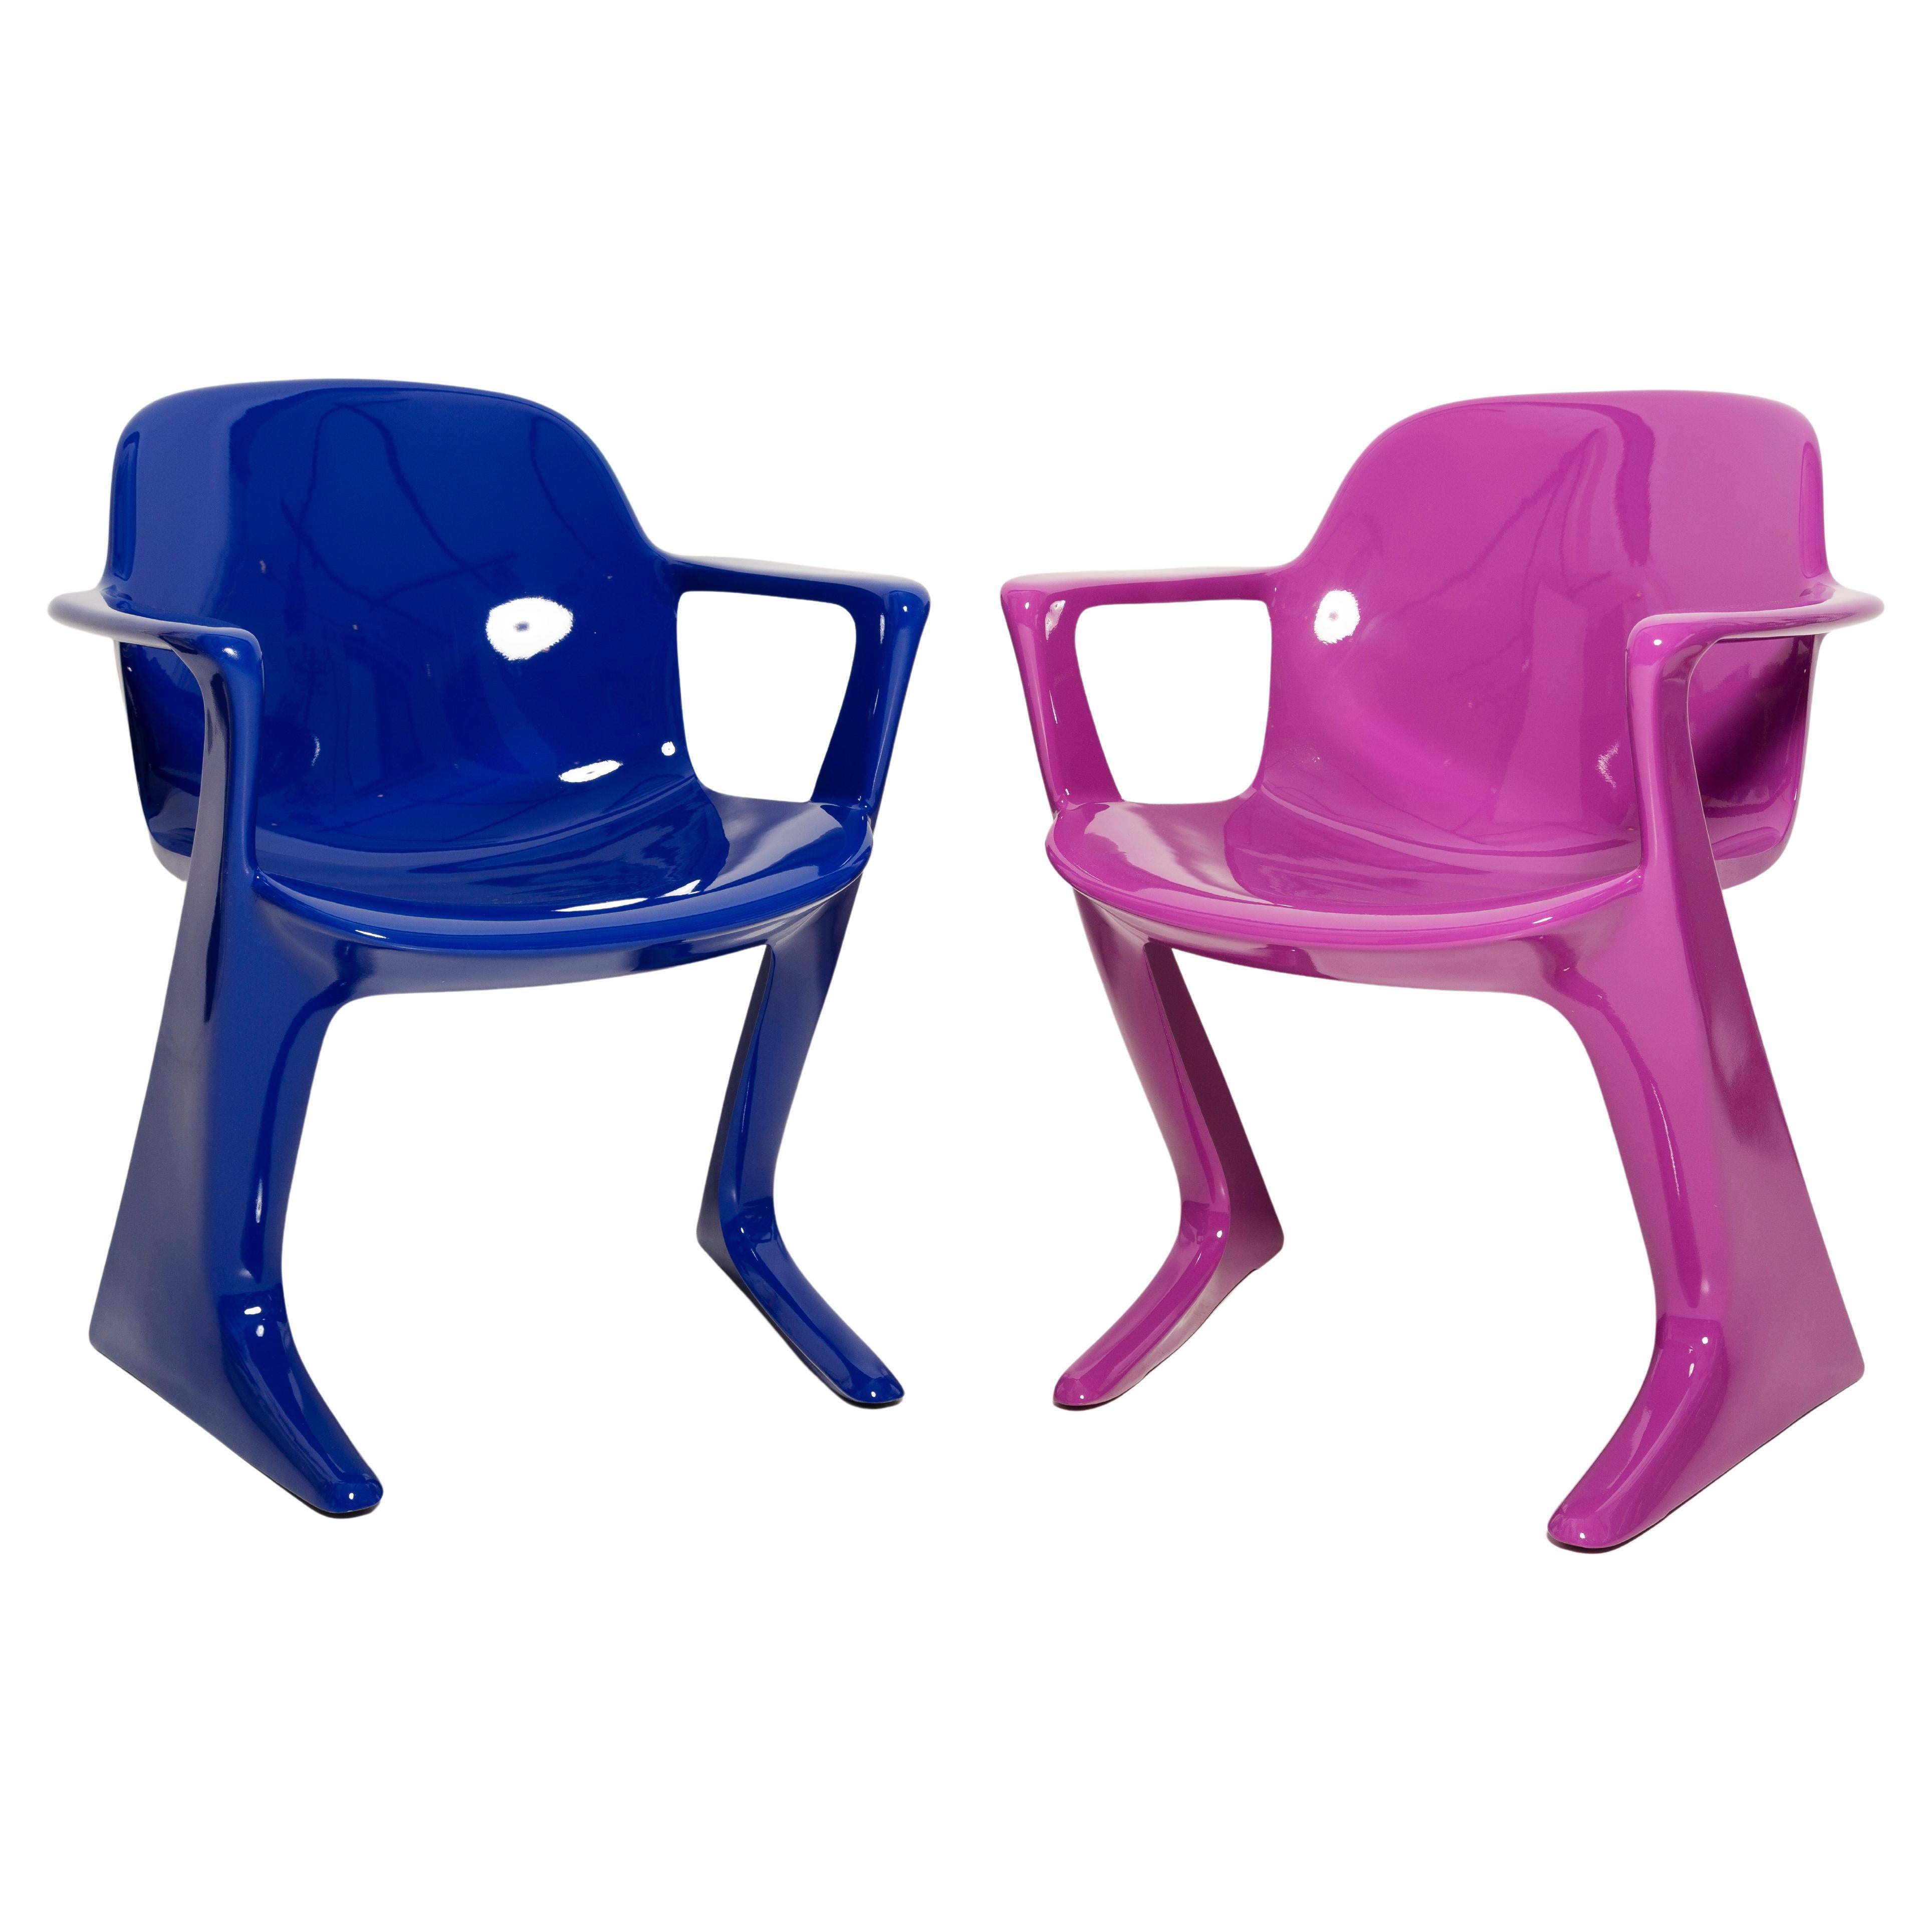 Two Mid-Century Purple and Blue Kangaroo Chairs, Ernst Moeckl, Germany, 1968 For Sale